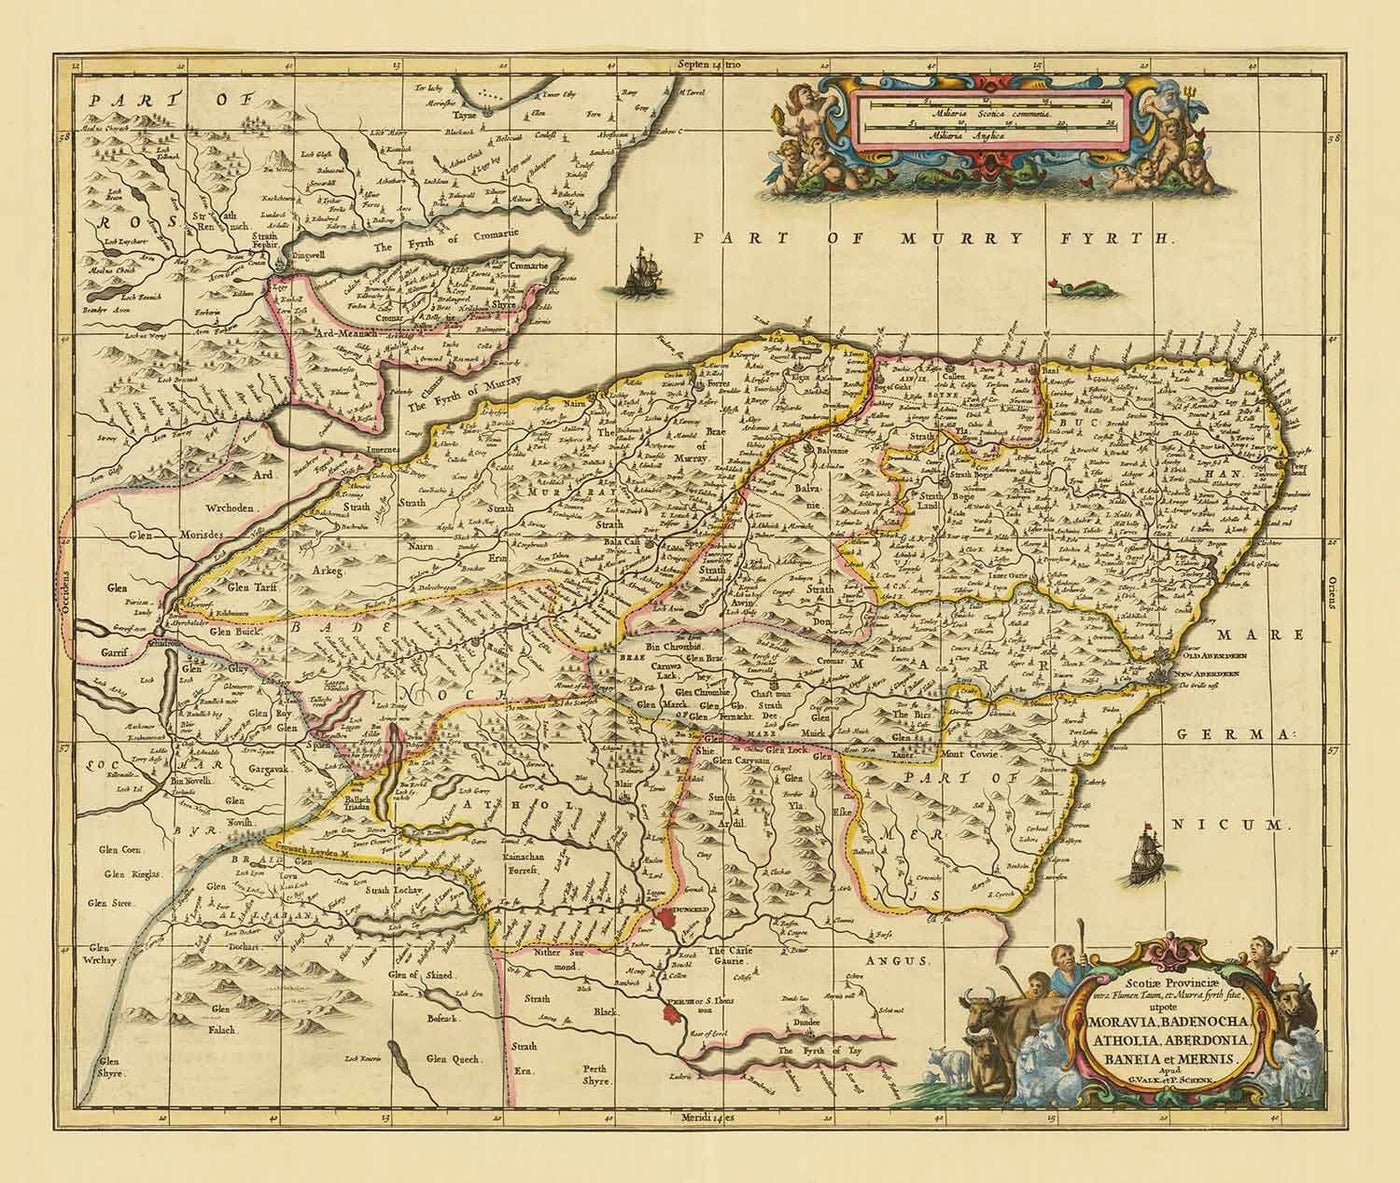 Old Map of Aberdeen, Inverness, Moray & Angus, 1690 - Dundee, Perth, Fraserburgh, Loch Ness, Scottish Highlands